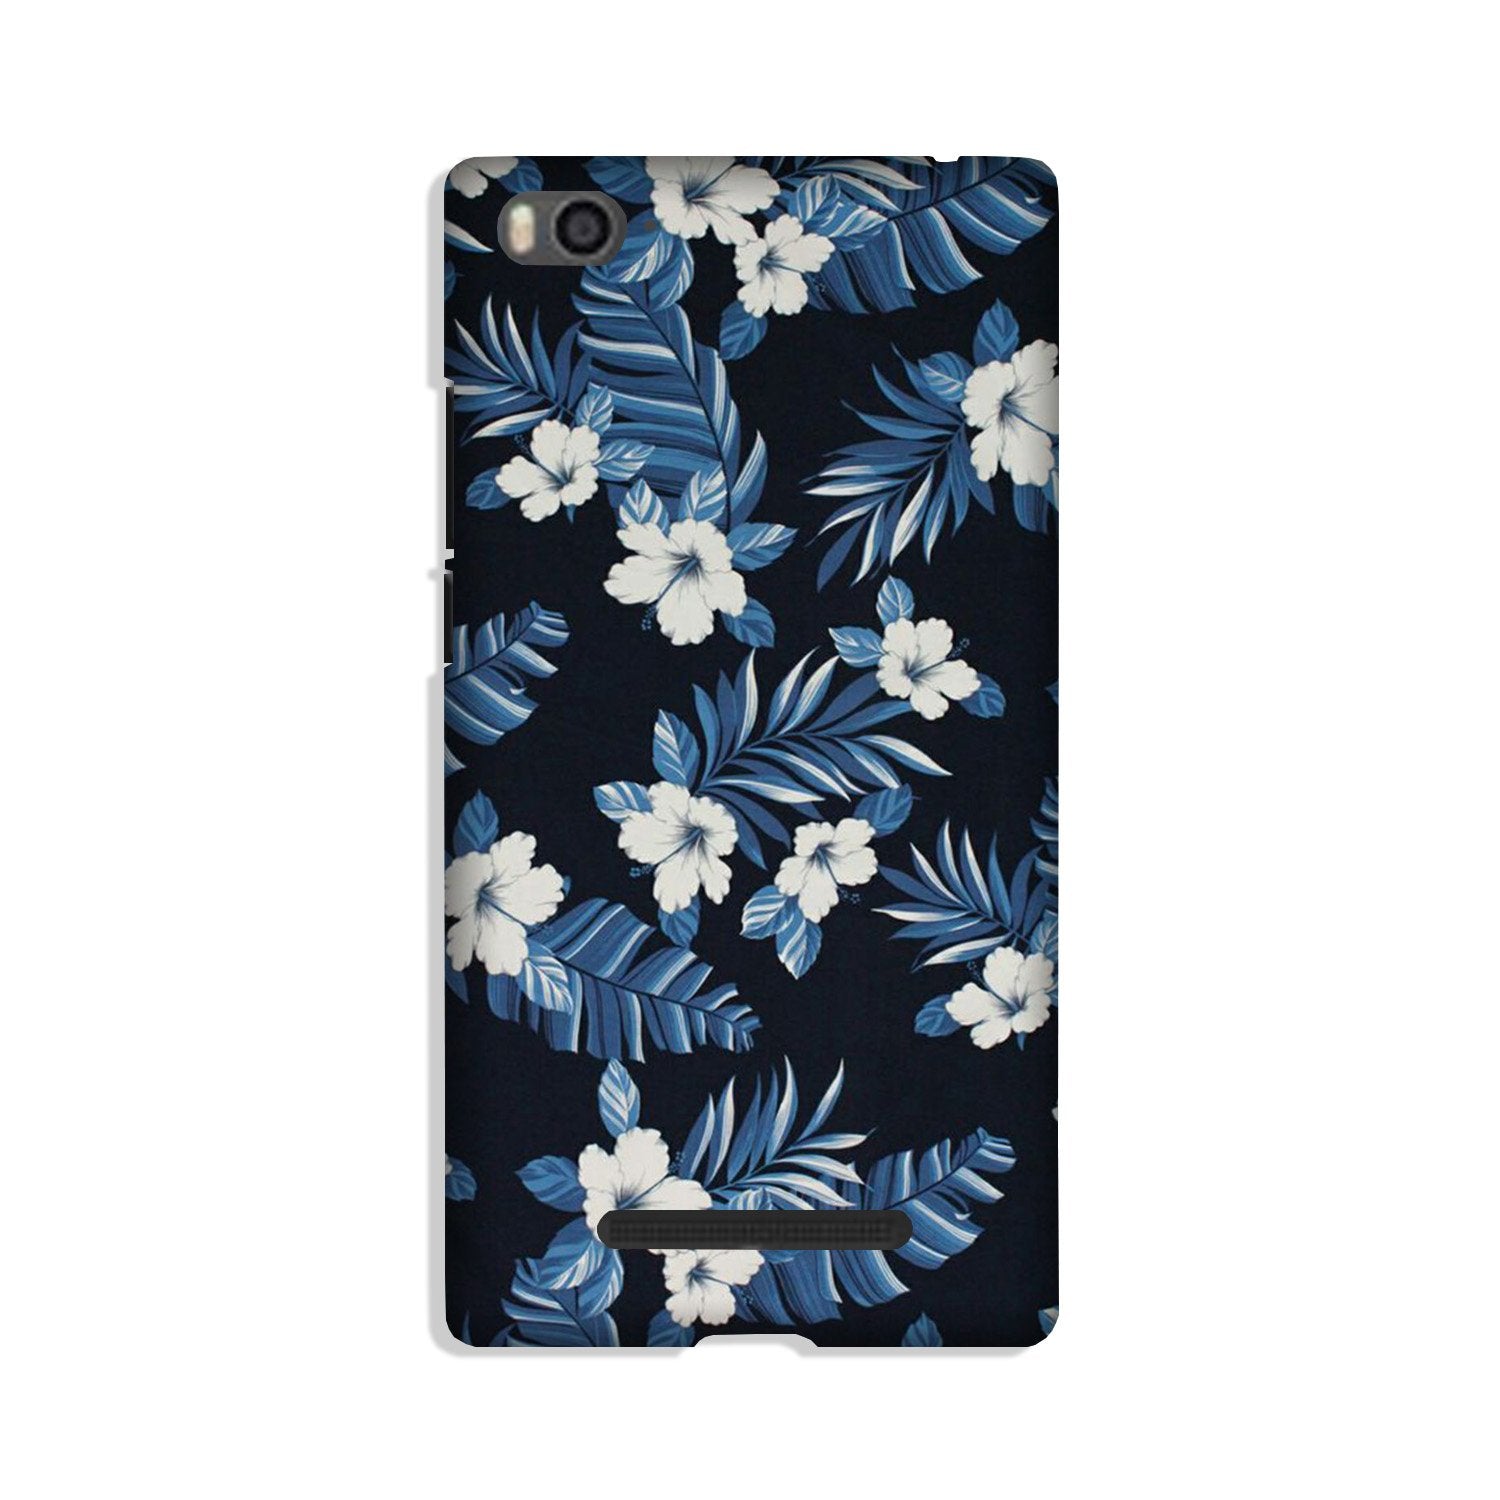 White flowers Blue Background2 Case for Redmi 4A